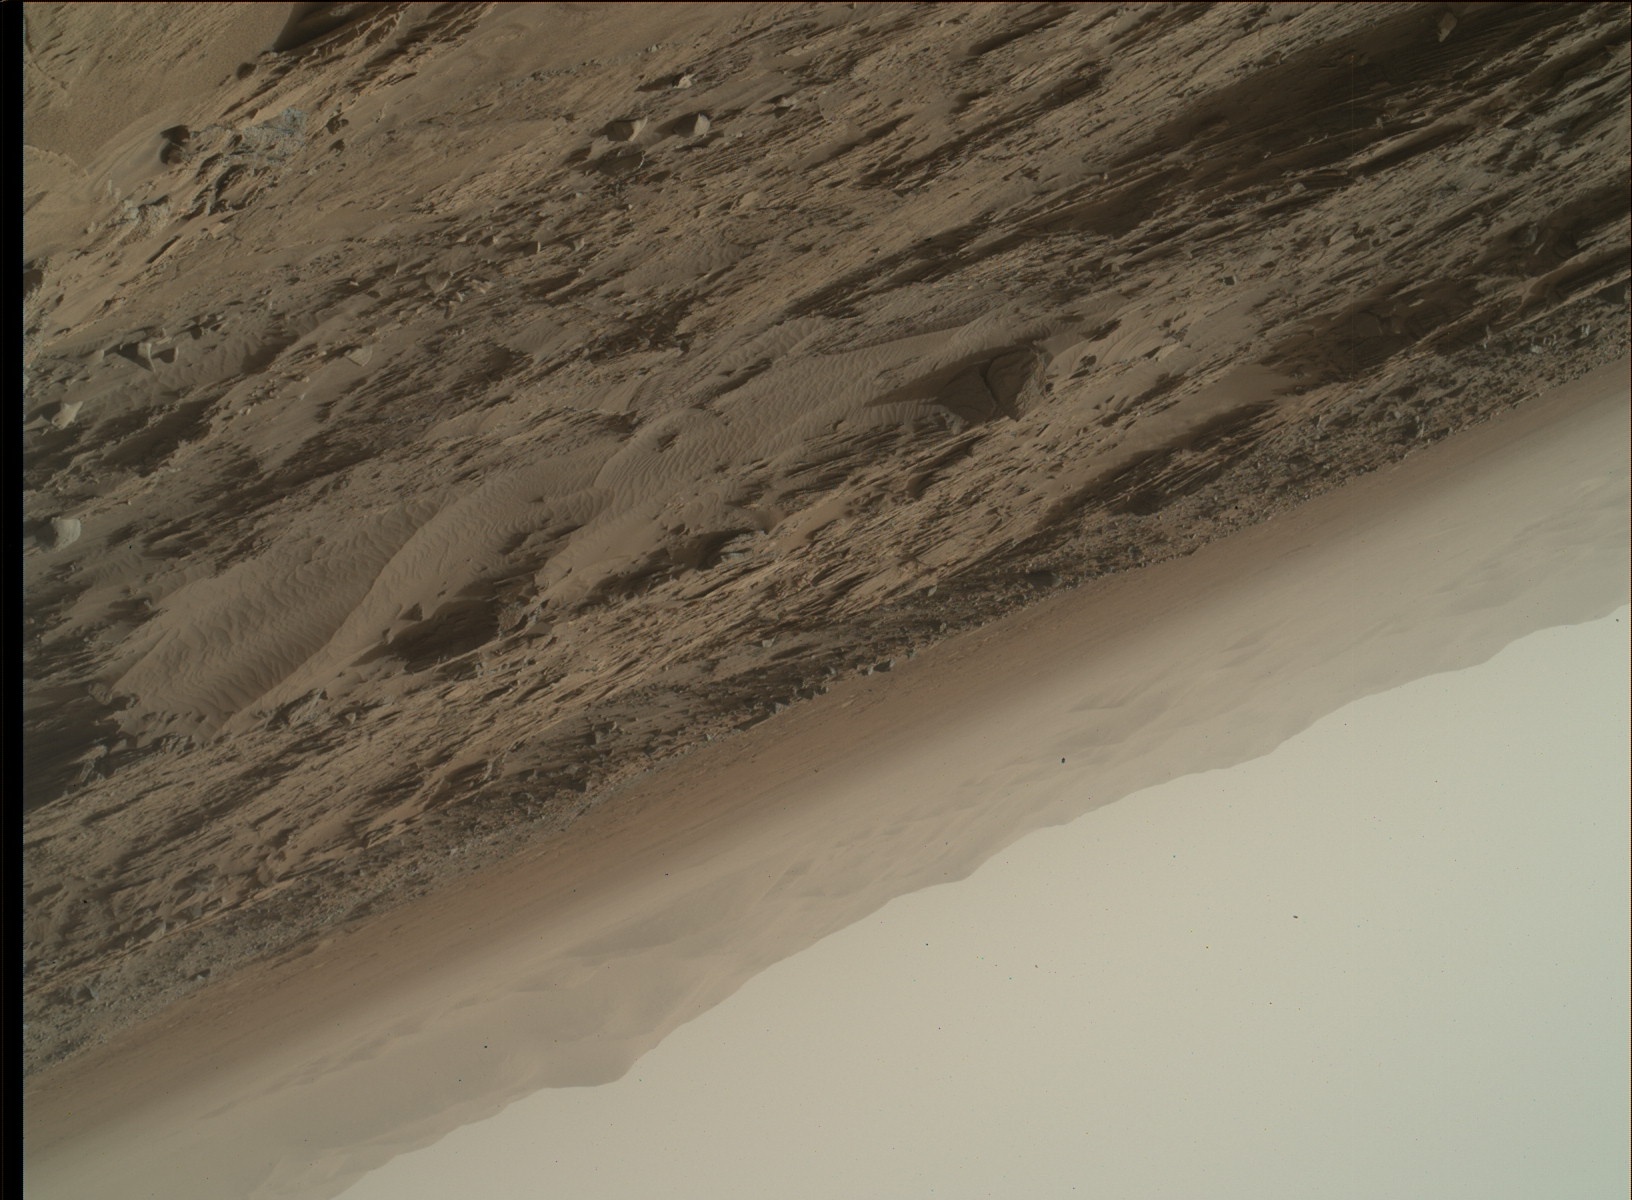 Nasa's Mars rover Curiosity acquired this image using its Mars Hand Lens Imager (MAHLI) on Sol 1085